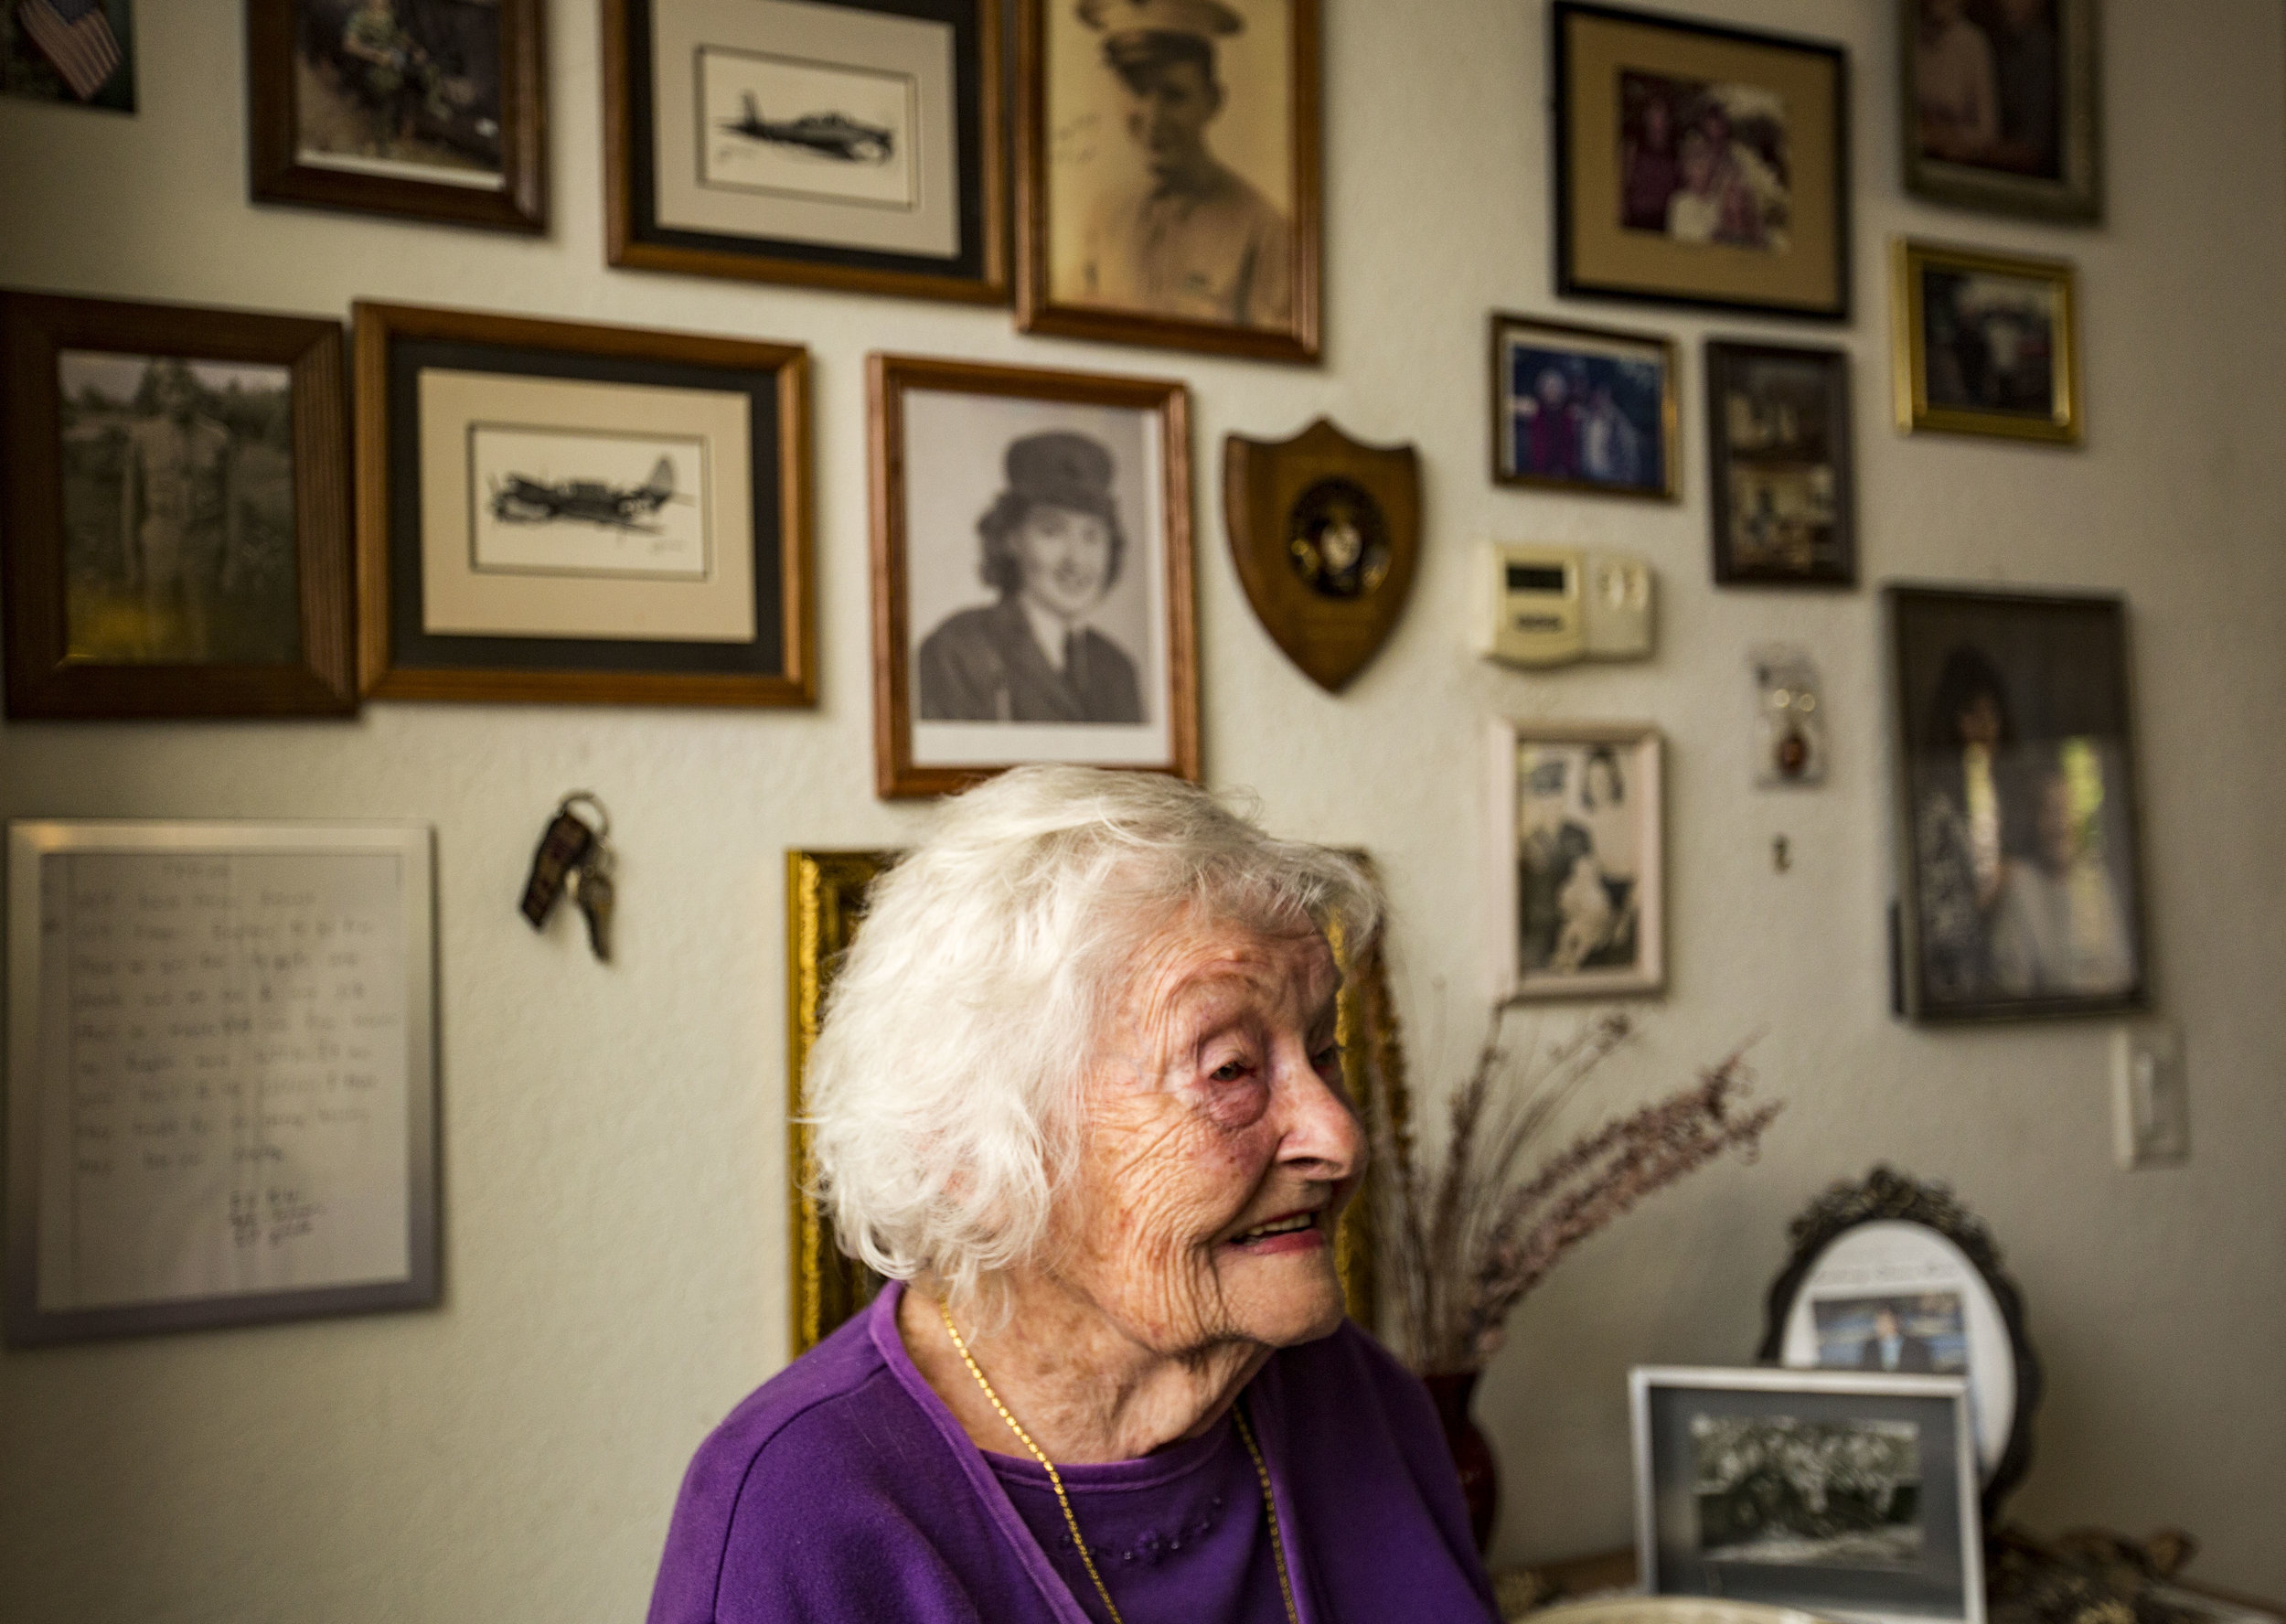  June Whitehurst, one of the first women to become a Marine, poses for a portrait in her home on March 22, 2018. Whitehurst celebrated her 95th birthday with her family on March 23, 2018. 